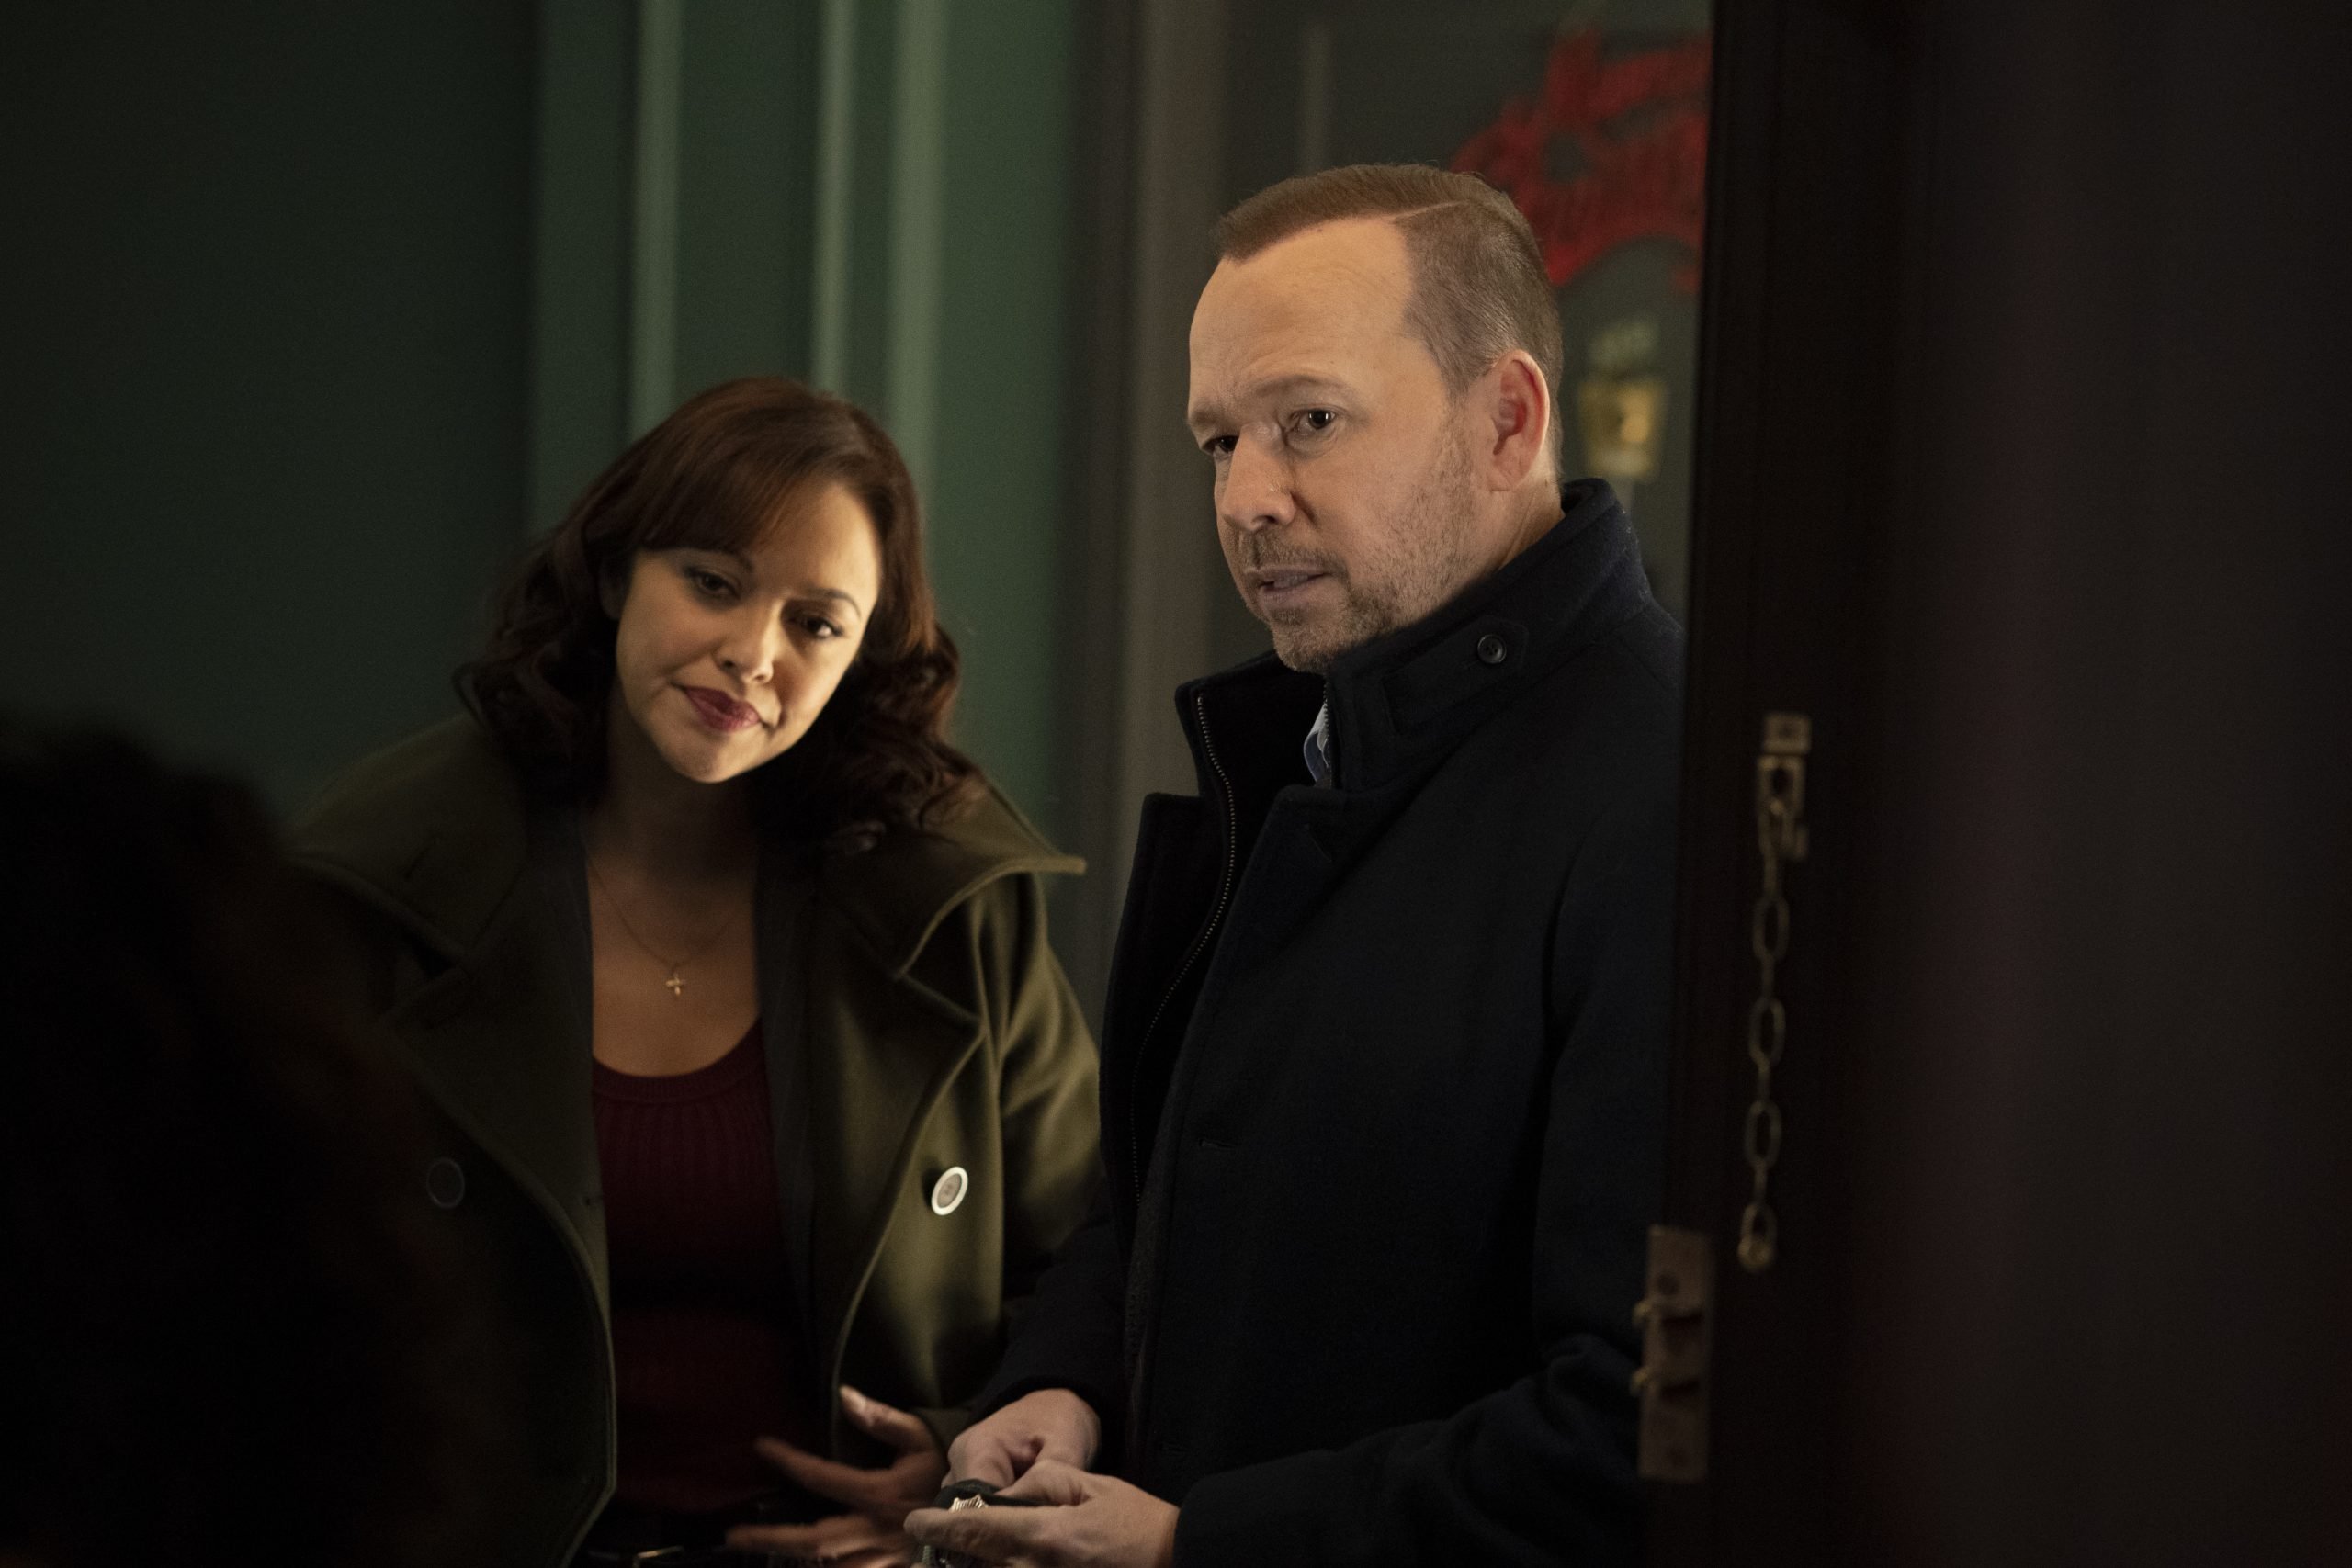 Is ‘Blue Bloods’ Ending After Season 11? 2 Stars Answer if They’re Done With the Show